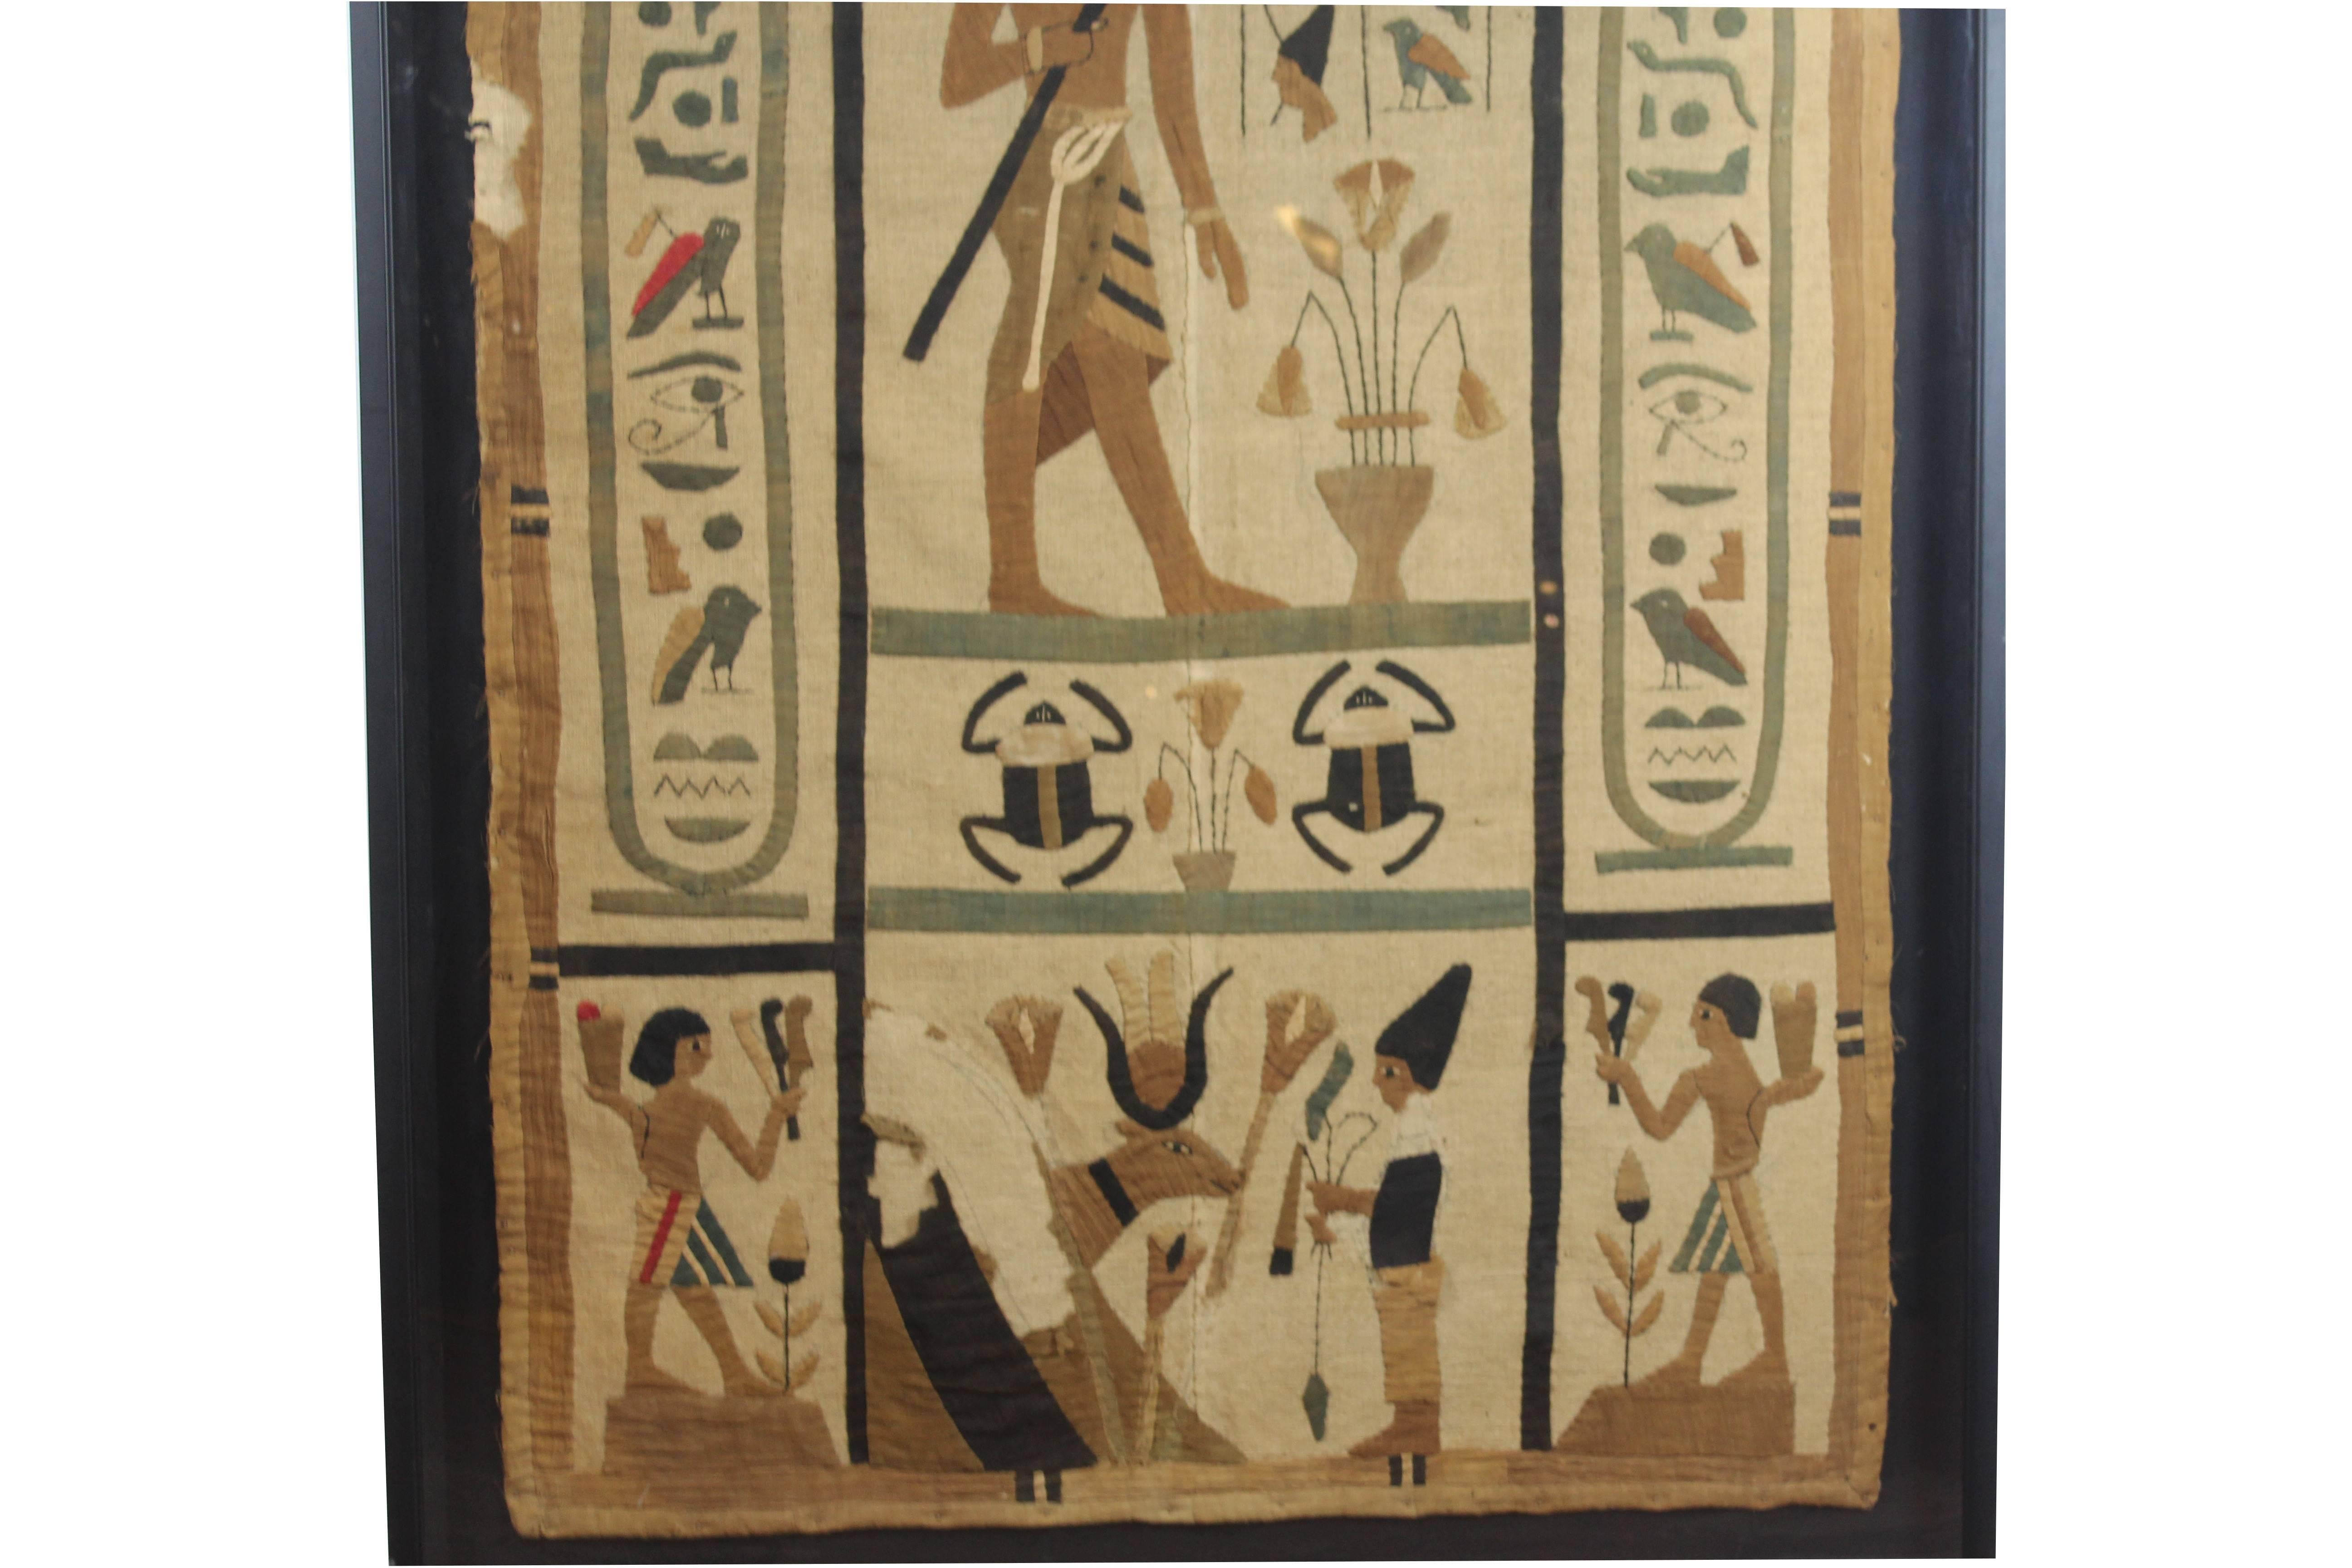 Ancient Egyptian tomb-cloth fragment, applied to a later backing in the 19th century. Fragments are colored with (now faded) vegetable dye's. Probably from the 